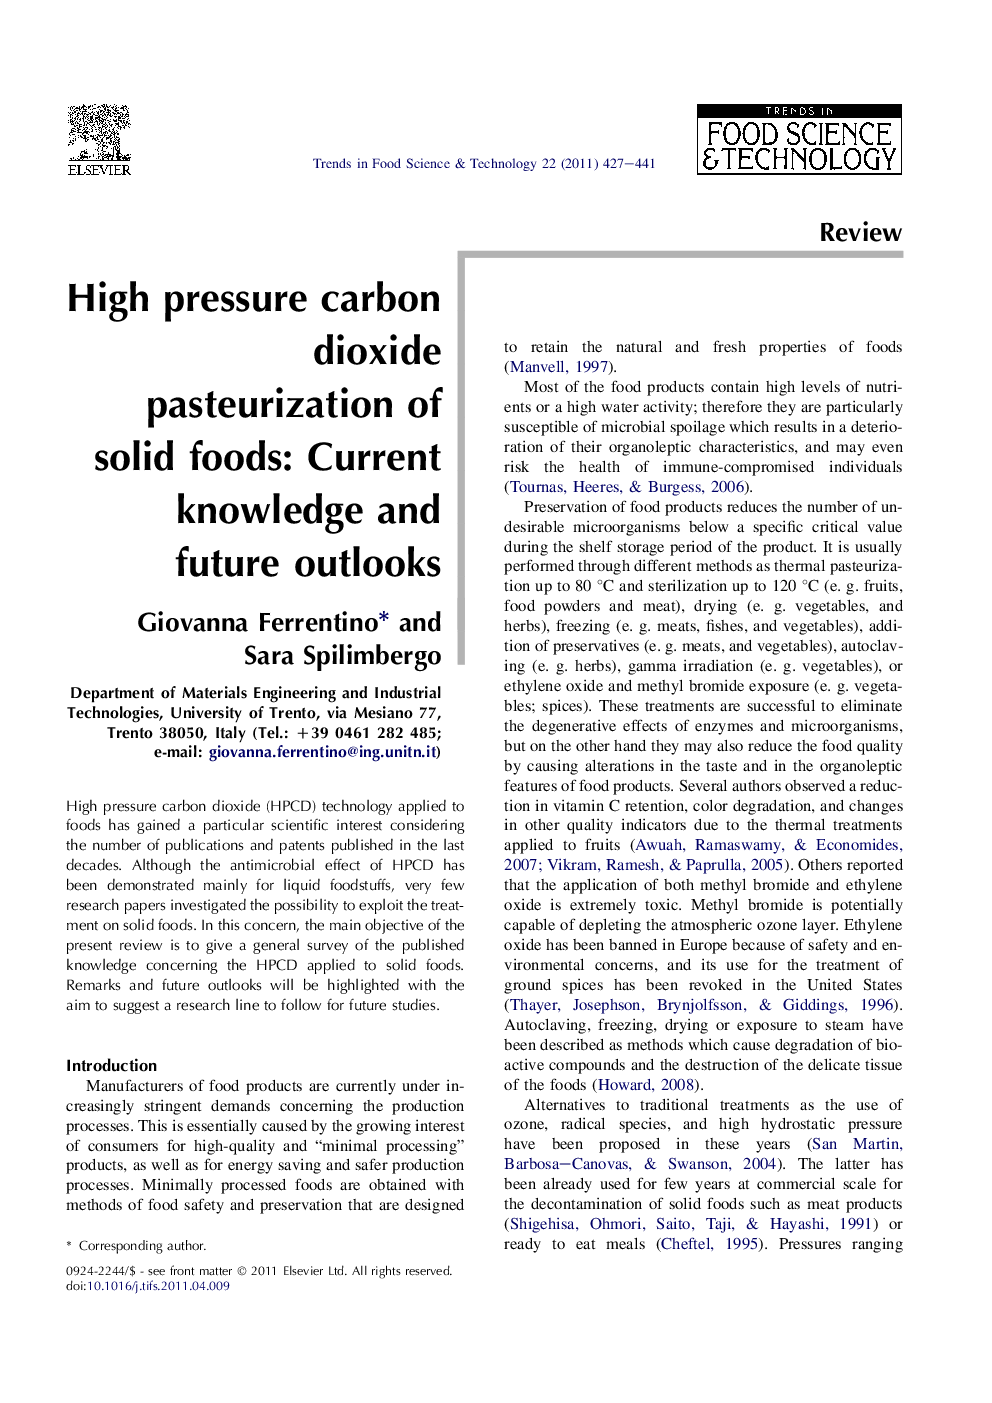 High pressure carbon dioxide pasteurization of solid foods: Current knowledge and future outlooks